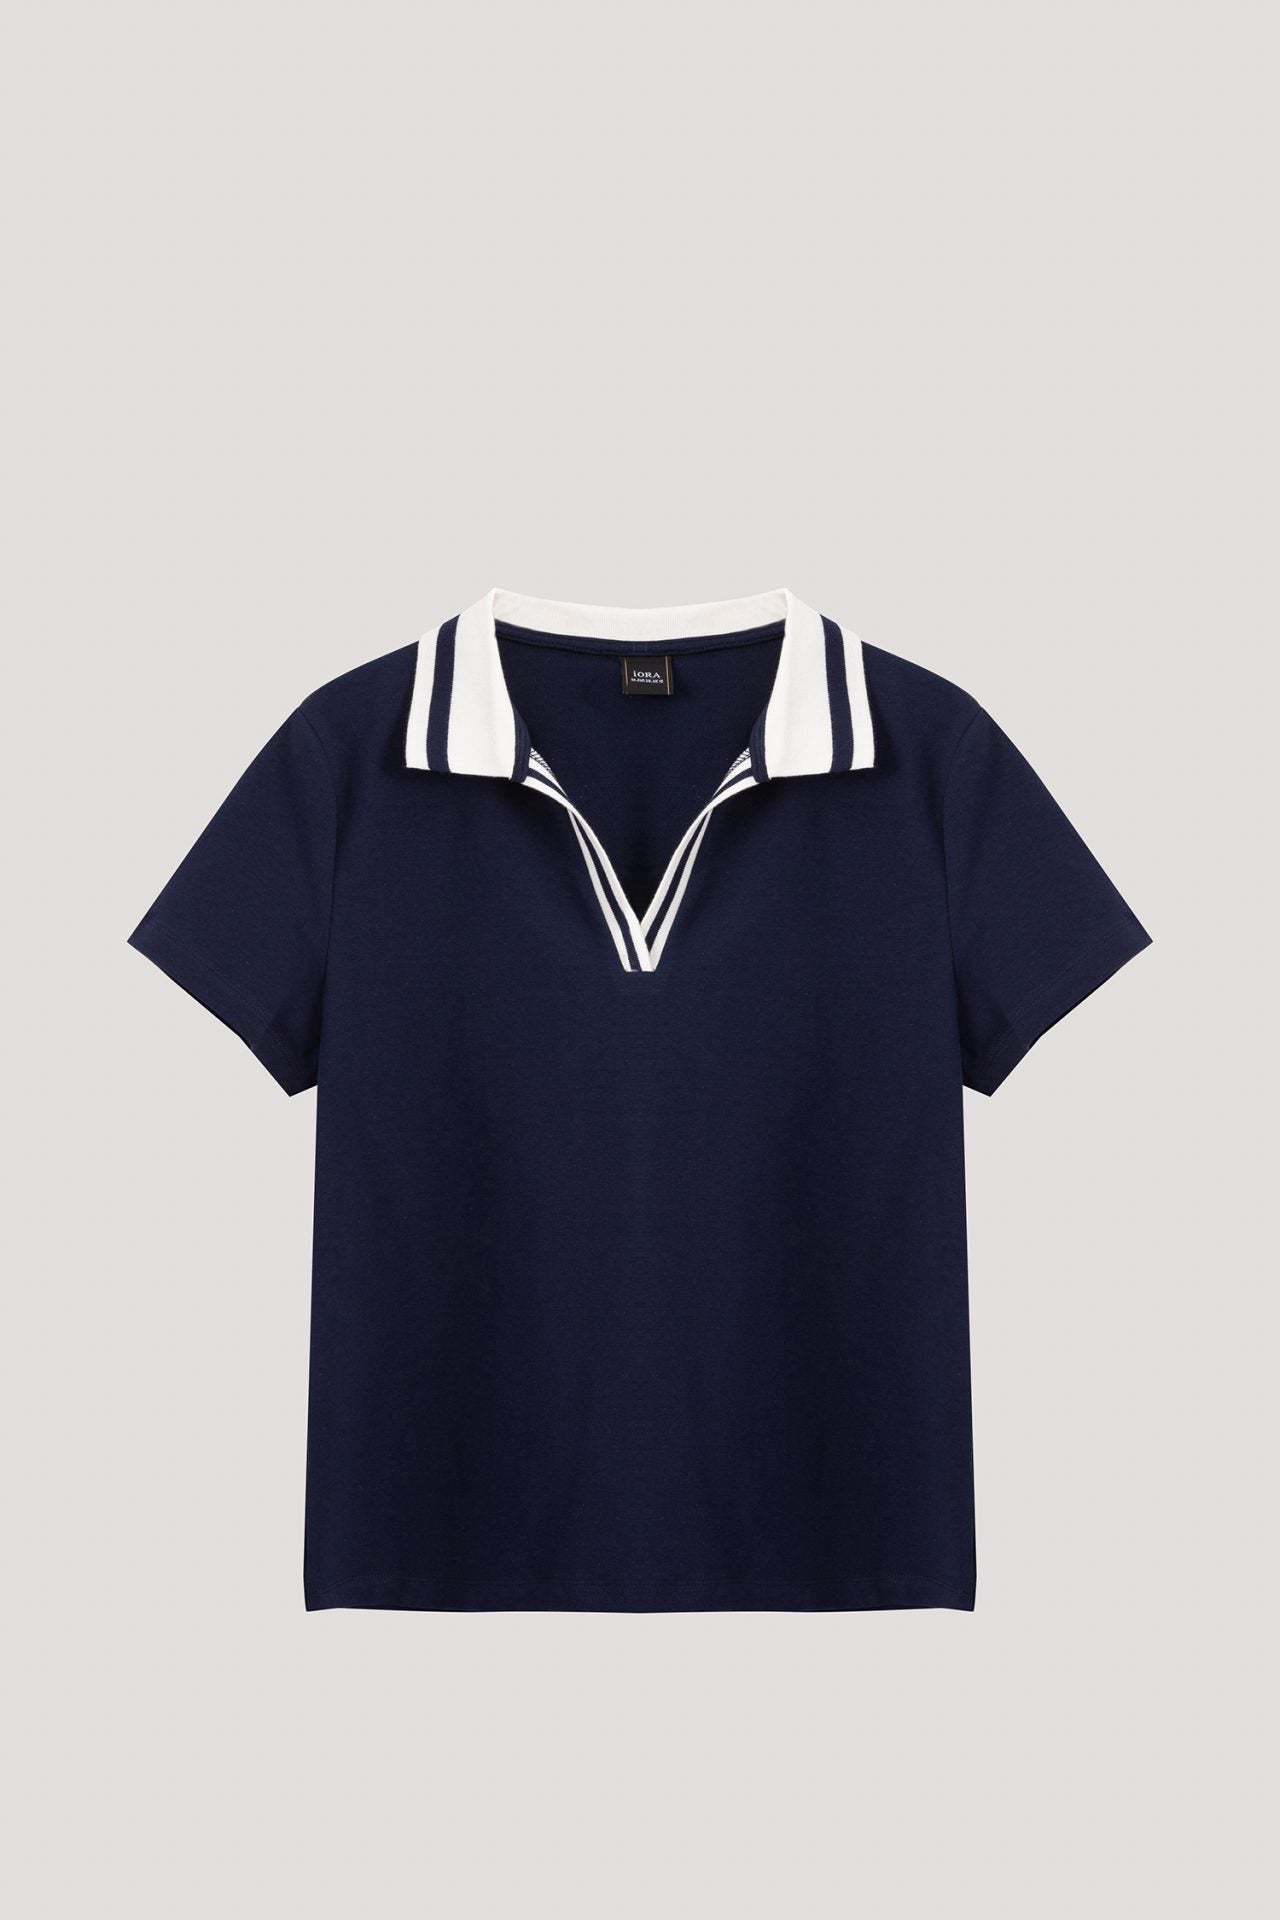 AT 10430 COLLARED BLOUSE NAVY